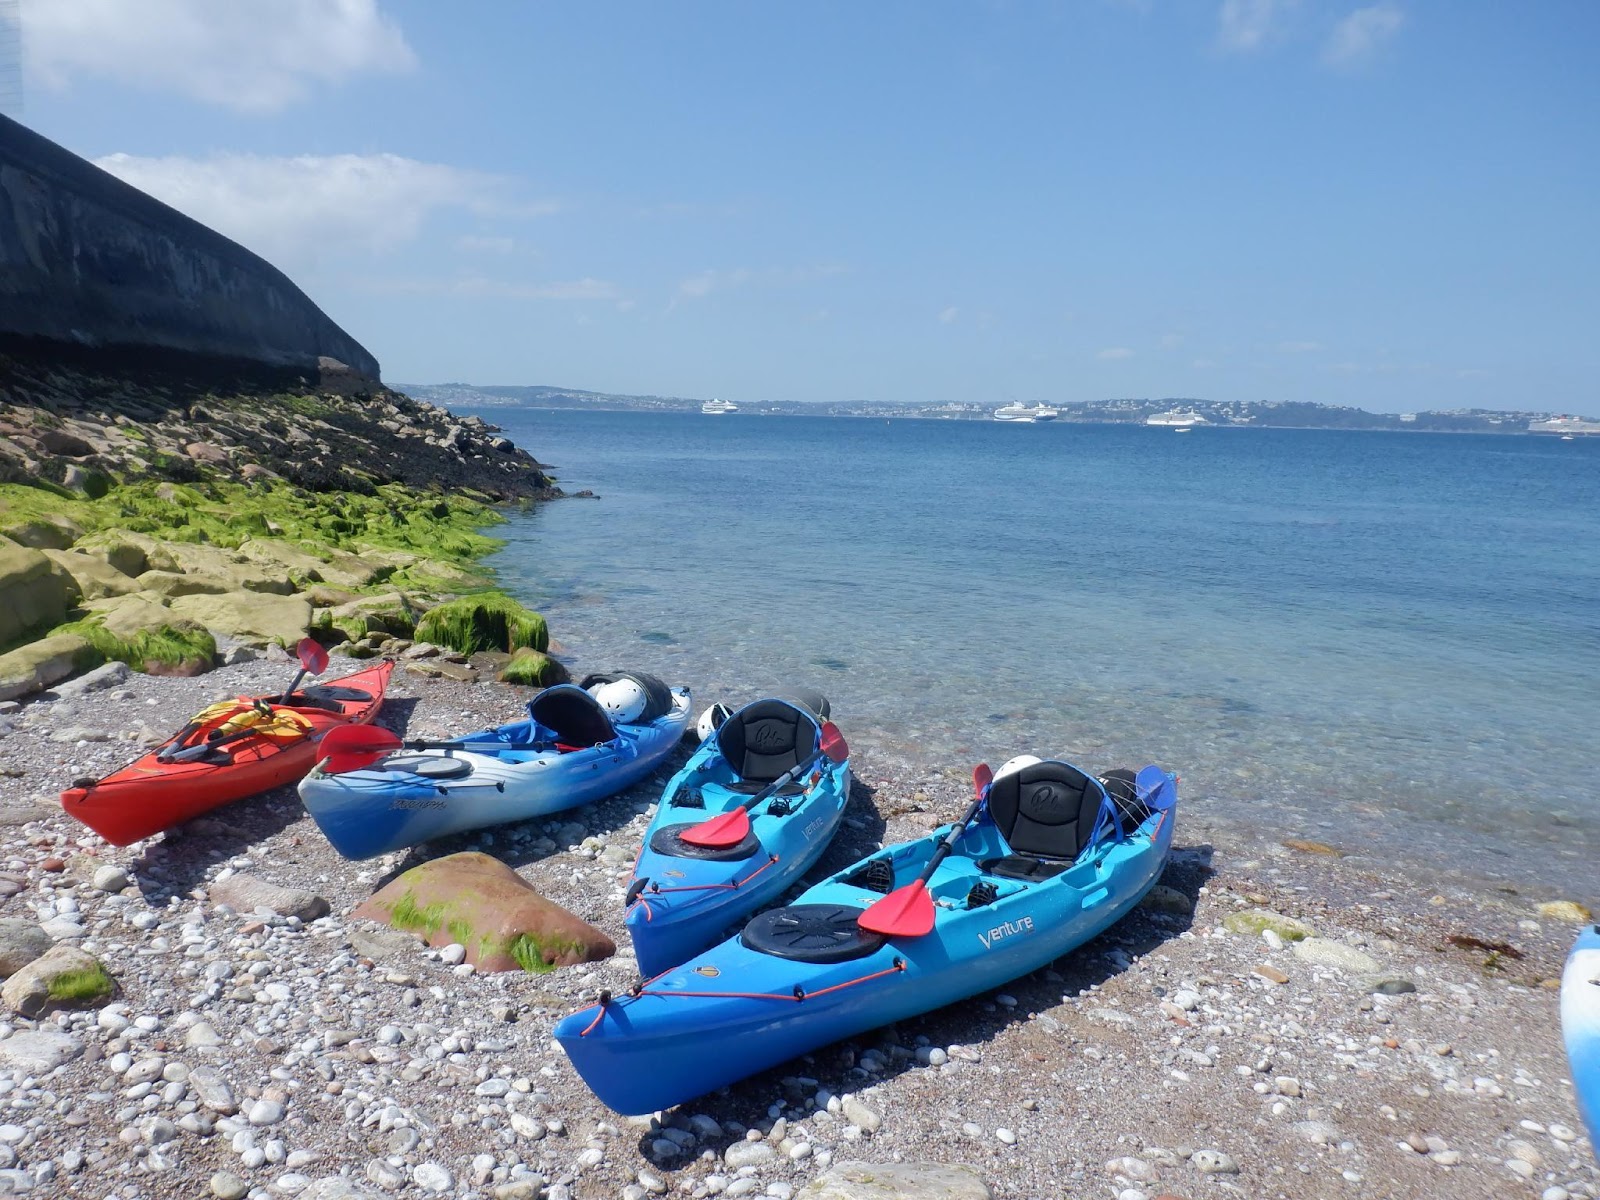 Kayaks on a rocky shore

Description automatically generated with low confidence